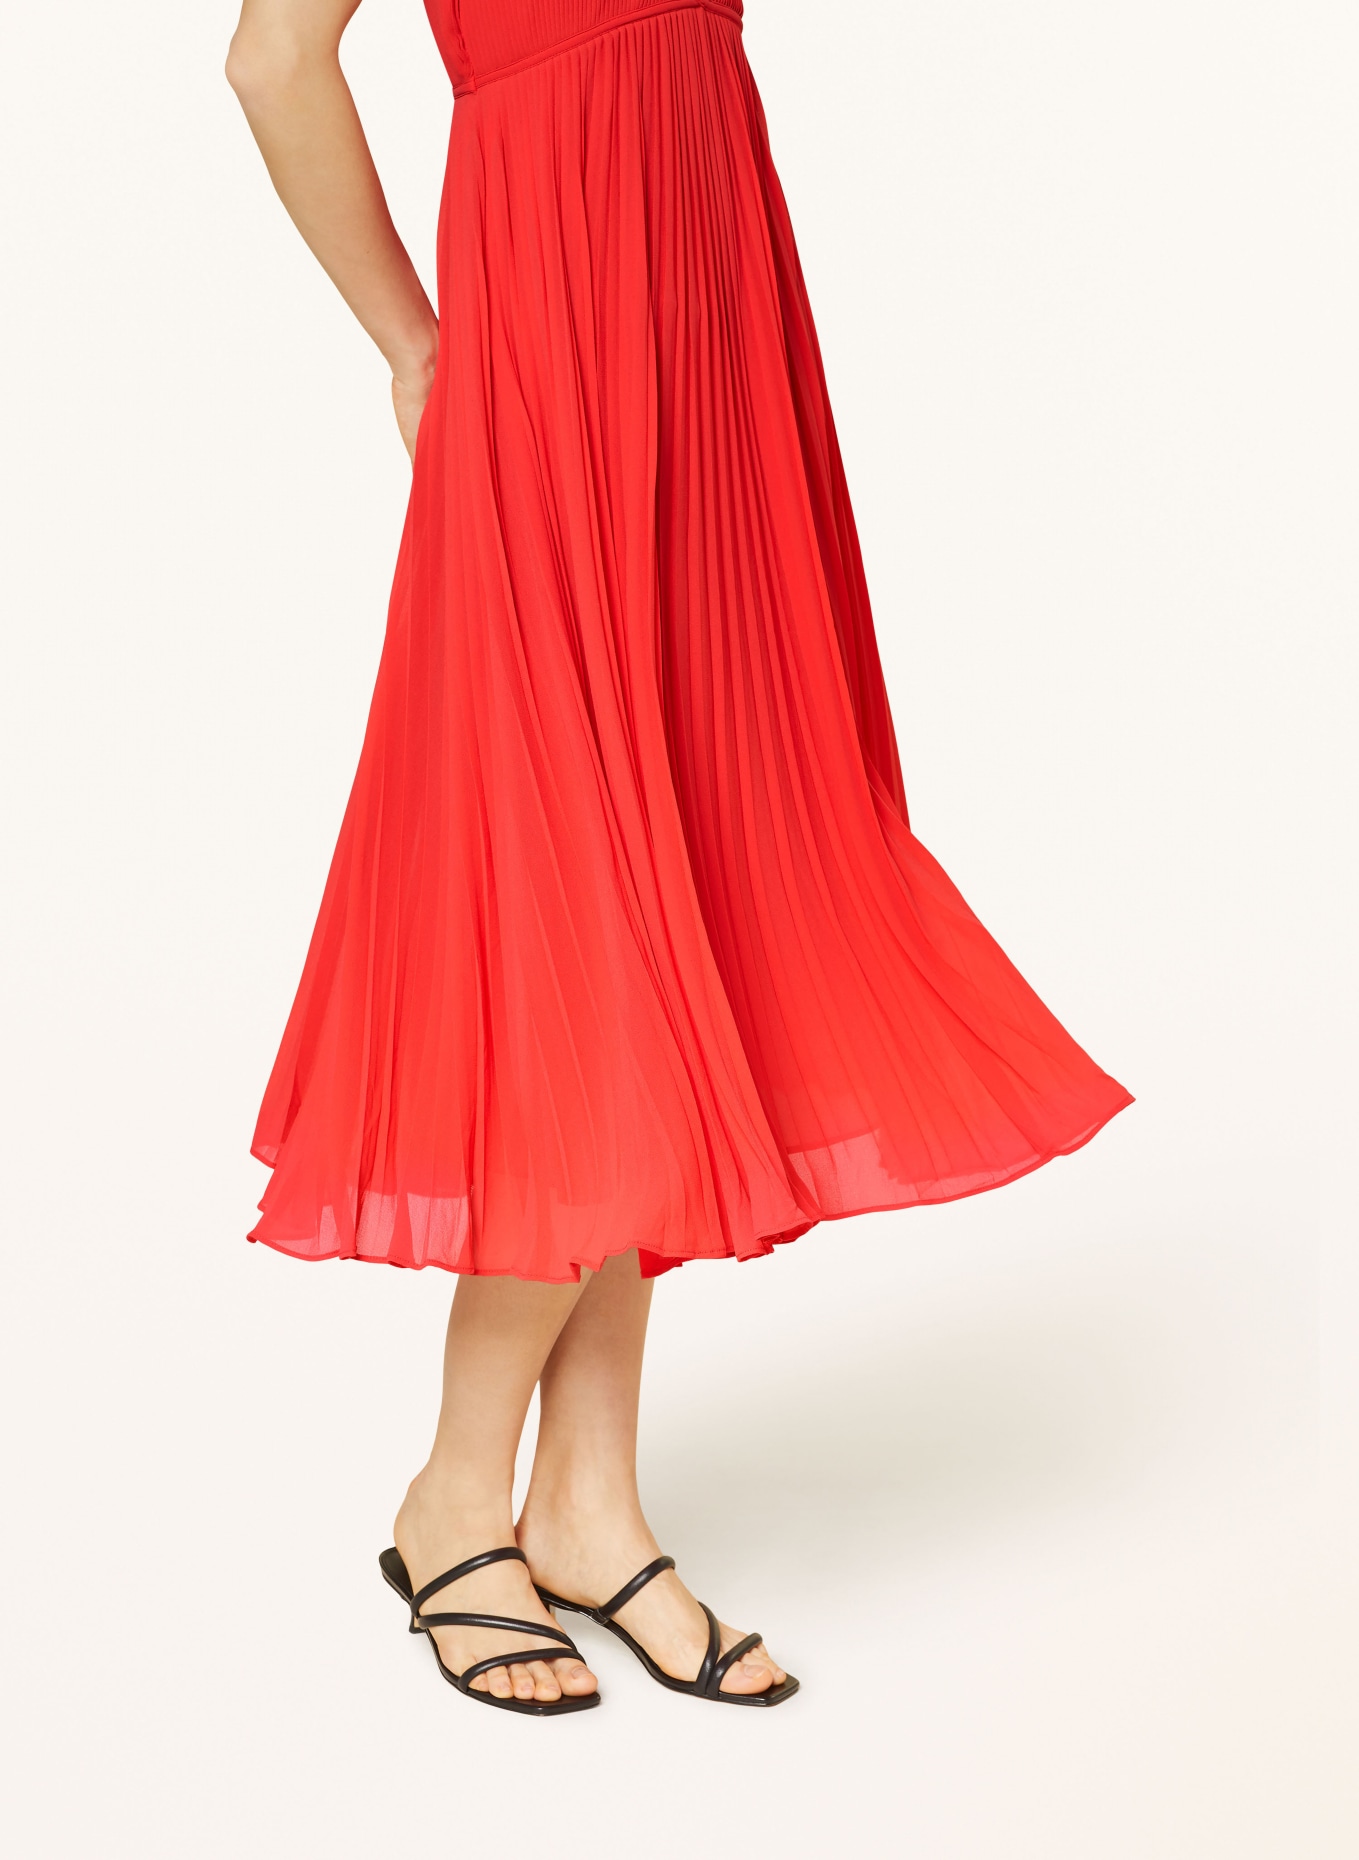 MICHAEL KORS Pleated dress, Color: RED (Image 5)